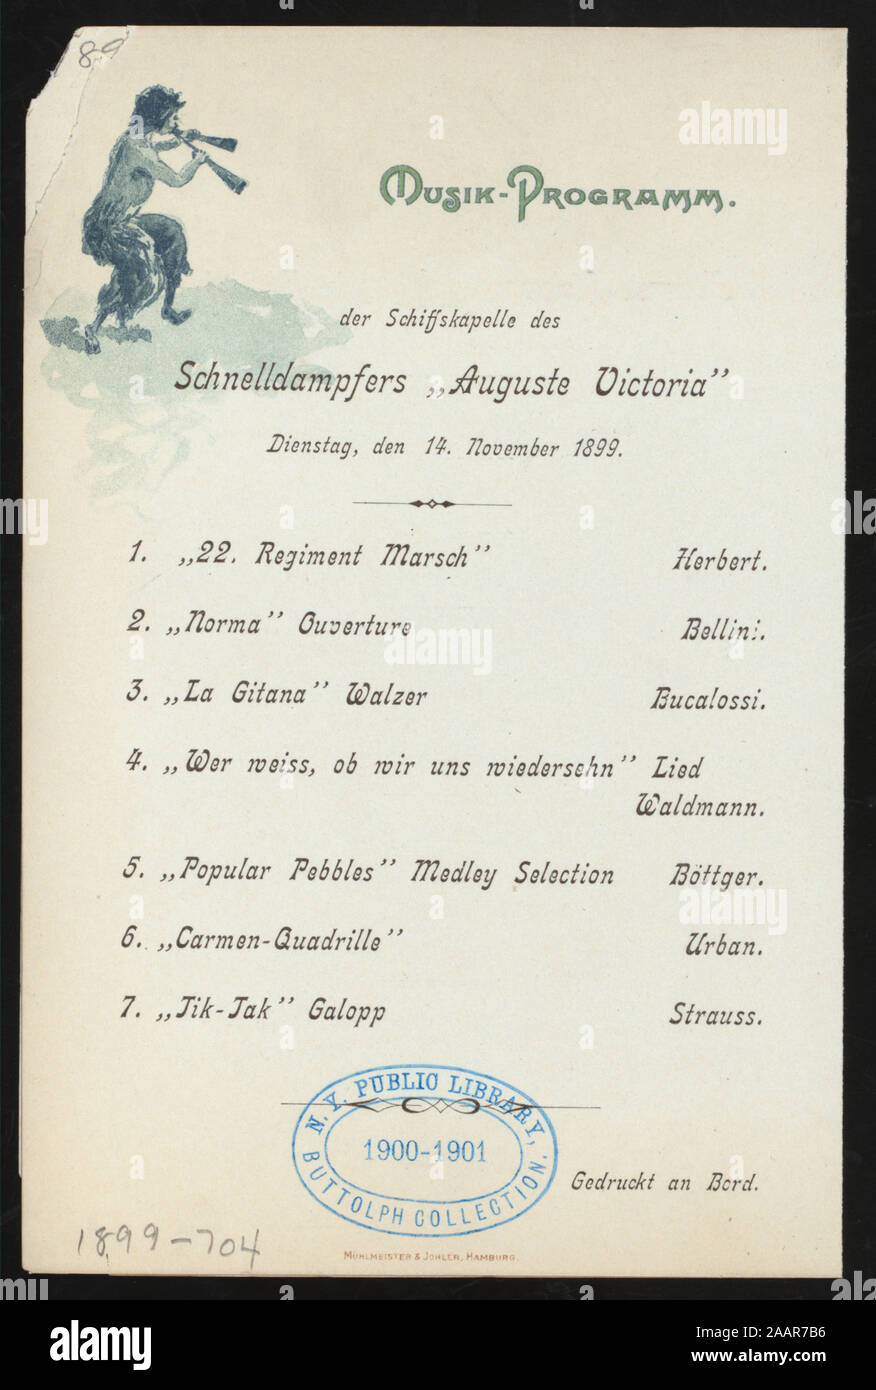 DINNER (held by) HAMBURG-AMERICA LINIE (at) EN ROUTE STEAMER AUGUST VICTORIA (SS;) GERMAN AND ENGLISH; COVER ILLUSTRATION OF STEAMSHP IN PORT; MUSICAL PROGRAM ON BACK COVER 1899-0704; DINNER [held by] HAMBURG-AMERICA LINIE [at] EN ROUTE STEAMER AUGUST VICTORIA (SS;) Stock Photo